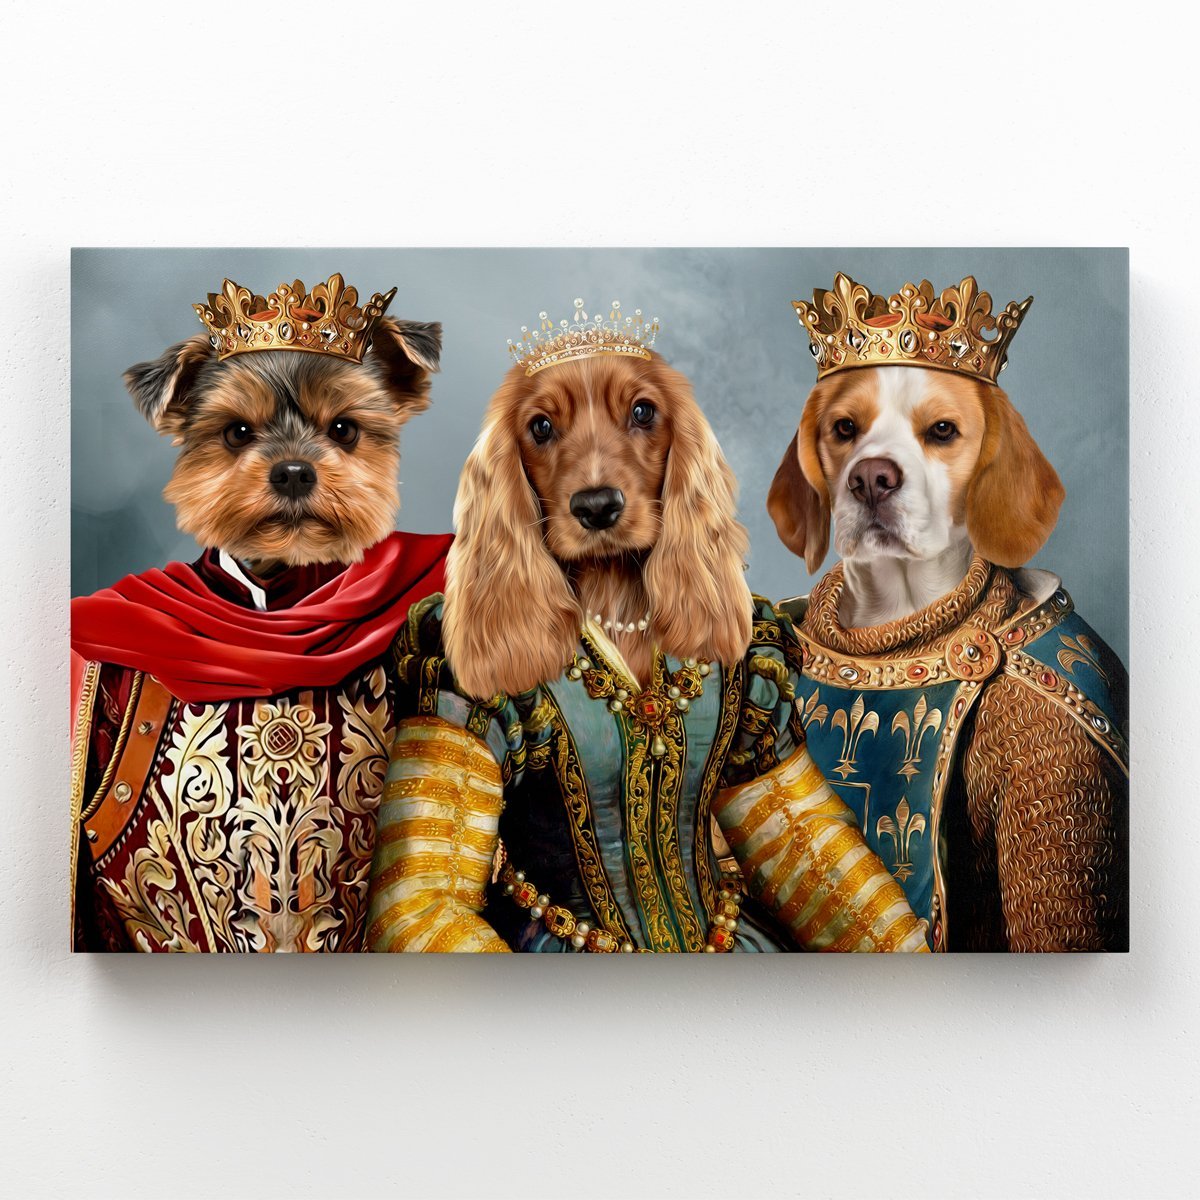 The Imperial 3: Custom Pet Canvas - Paw & Glory - #pet portraits# - #dog portraits# - #pet portraits uk#paw & glory, custom pet portrait canvas,dog photo on canvas, pet picture on canvas, personalised pet canvas, the pet on canvas, pet on canvas uk